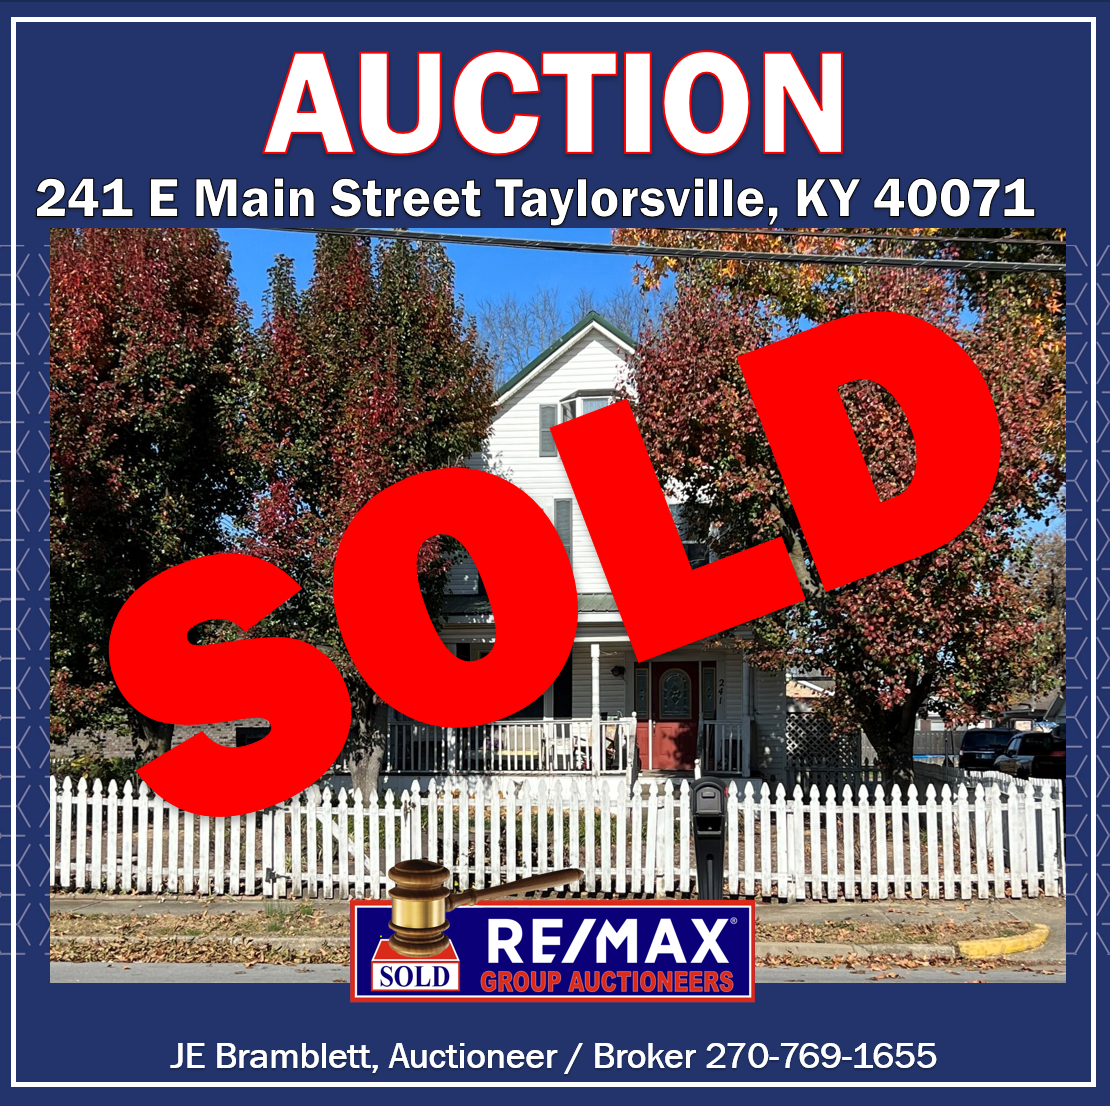 Auction | Home in Downtown Taylorsville | Personal Property | Saturday, December 30th @ 10:00 am EDT